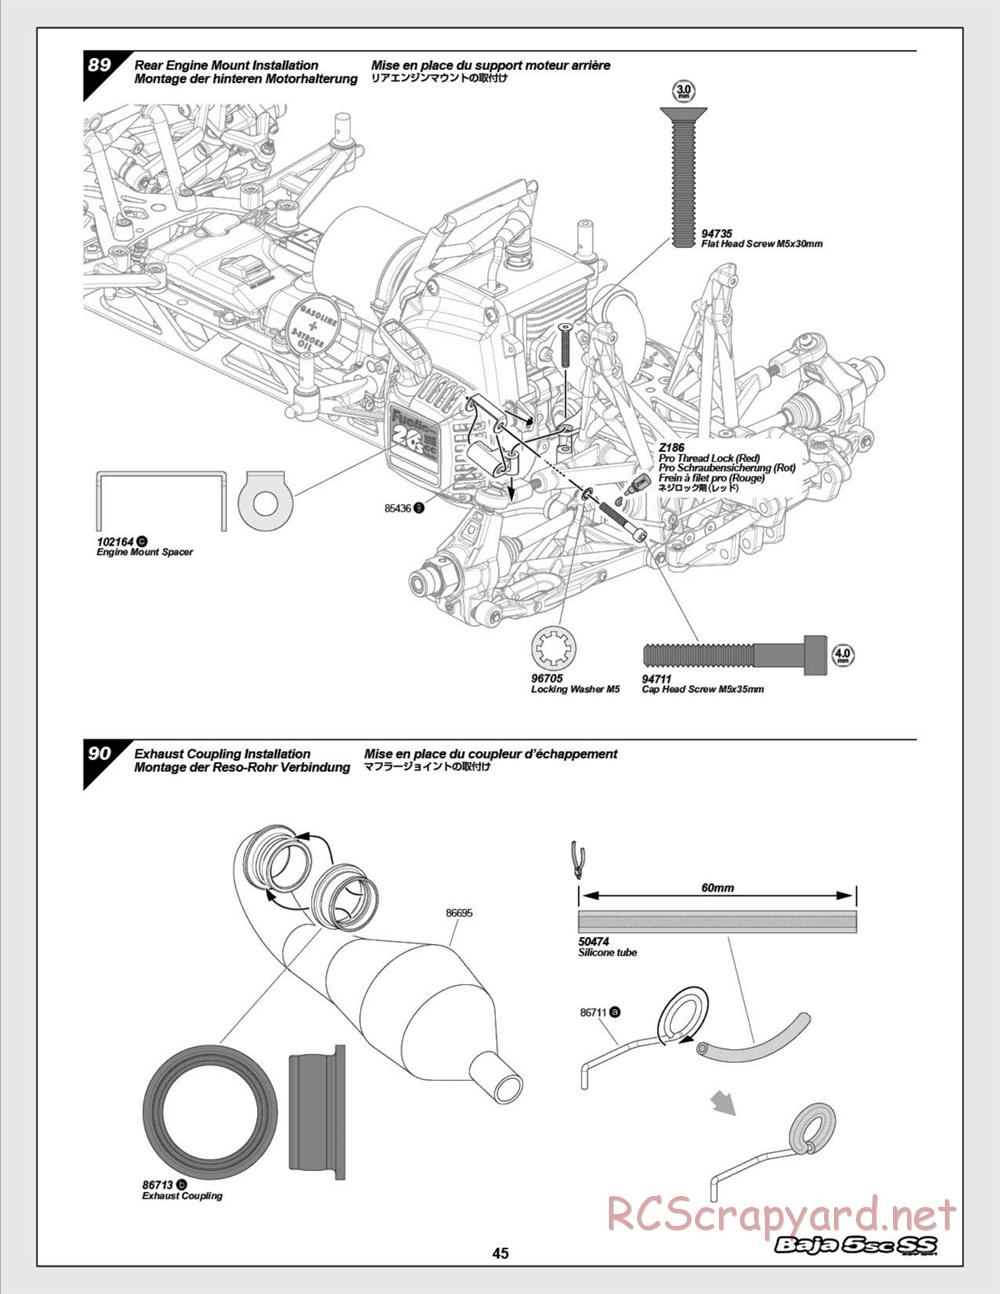 HPI - Baja 5SC SS - Exploded View - Page 45